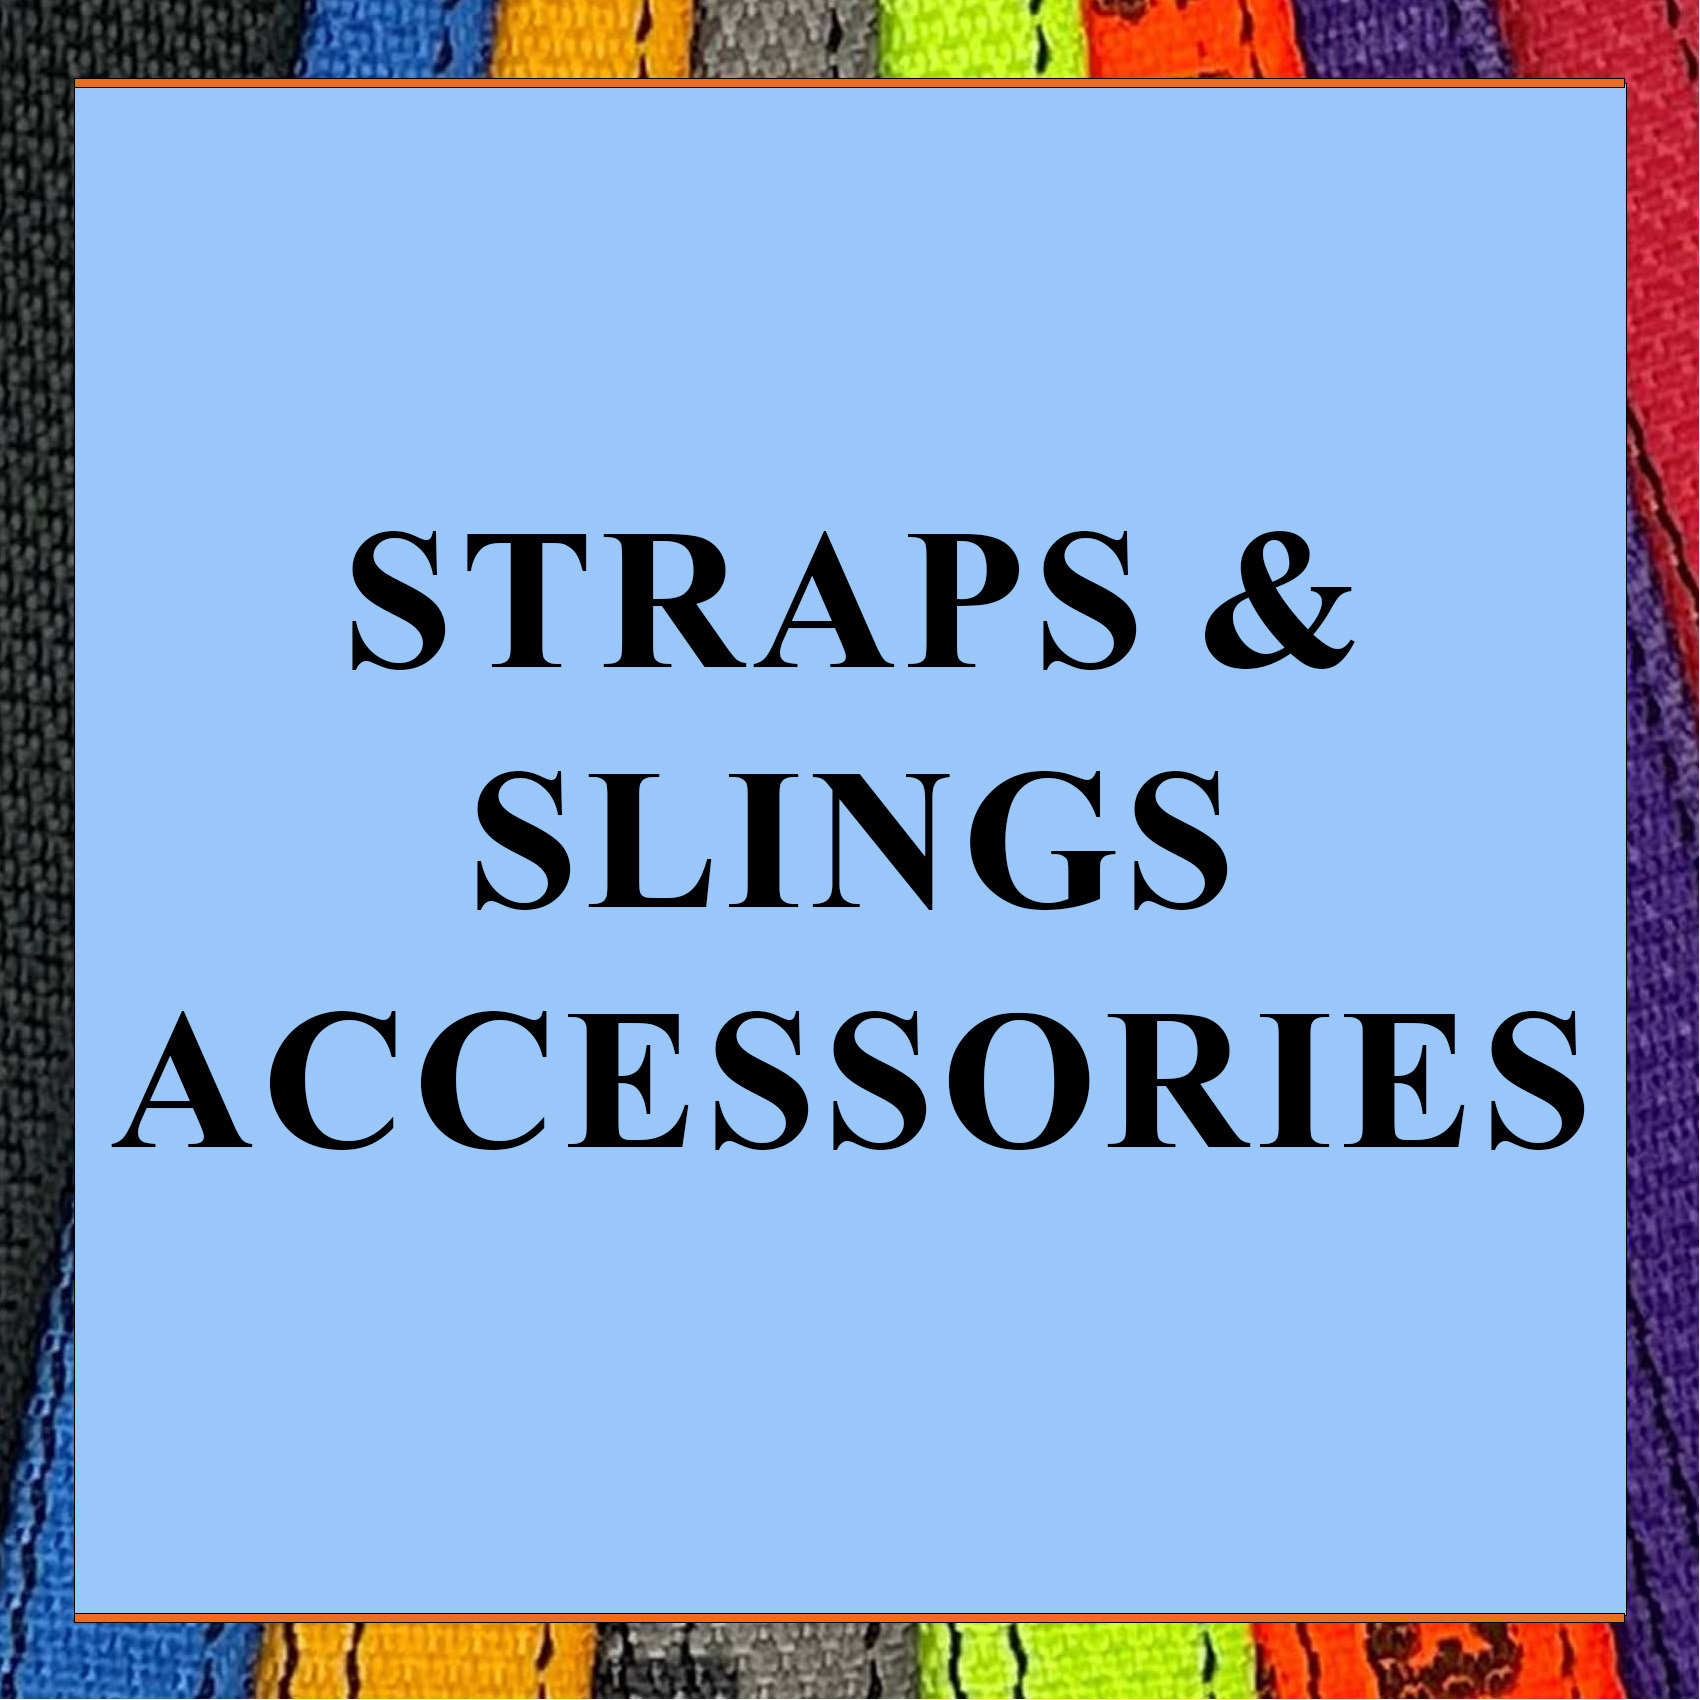 Straps & Slings Accessories